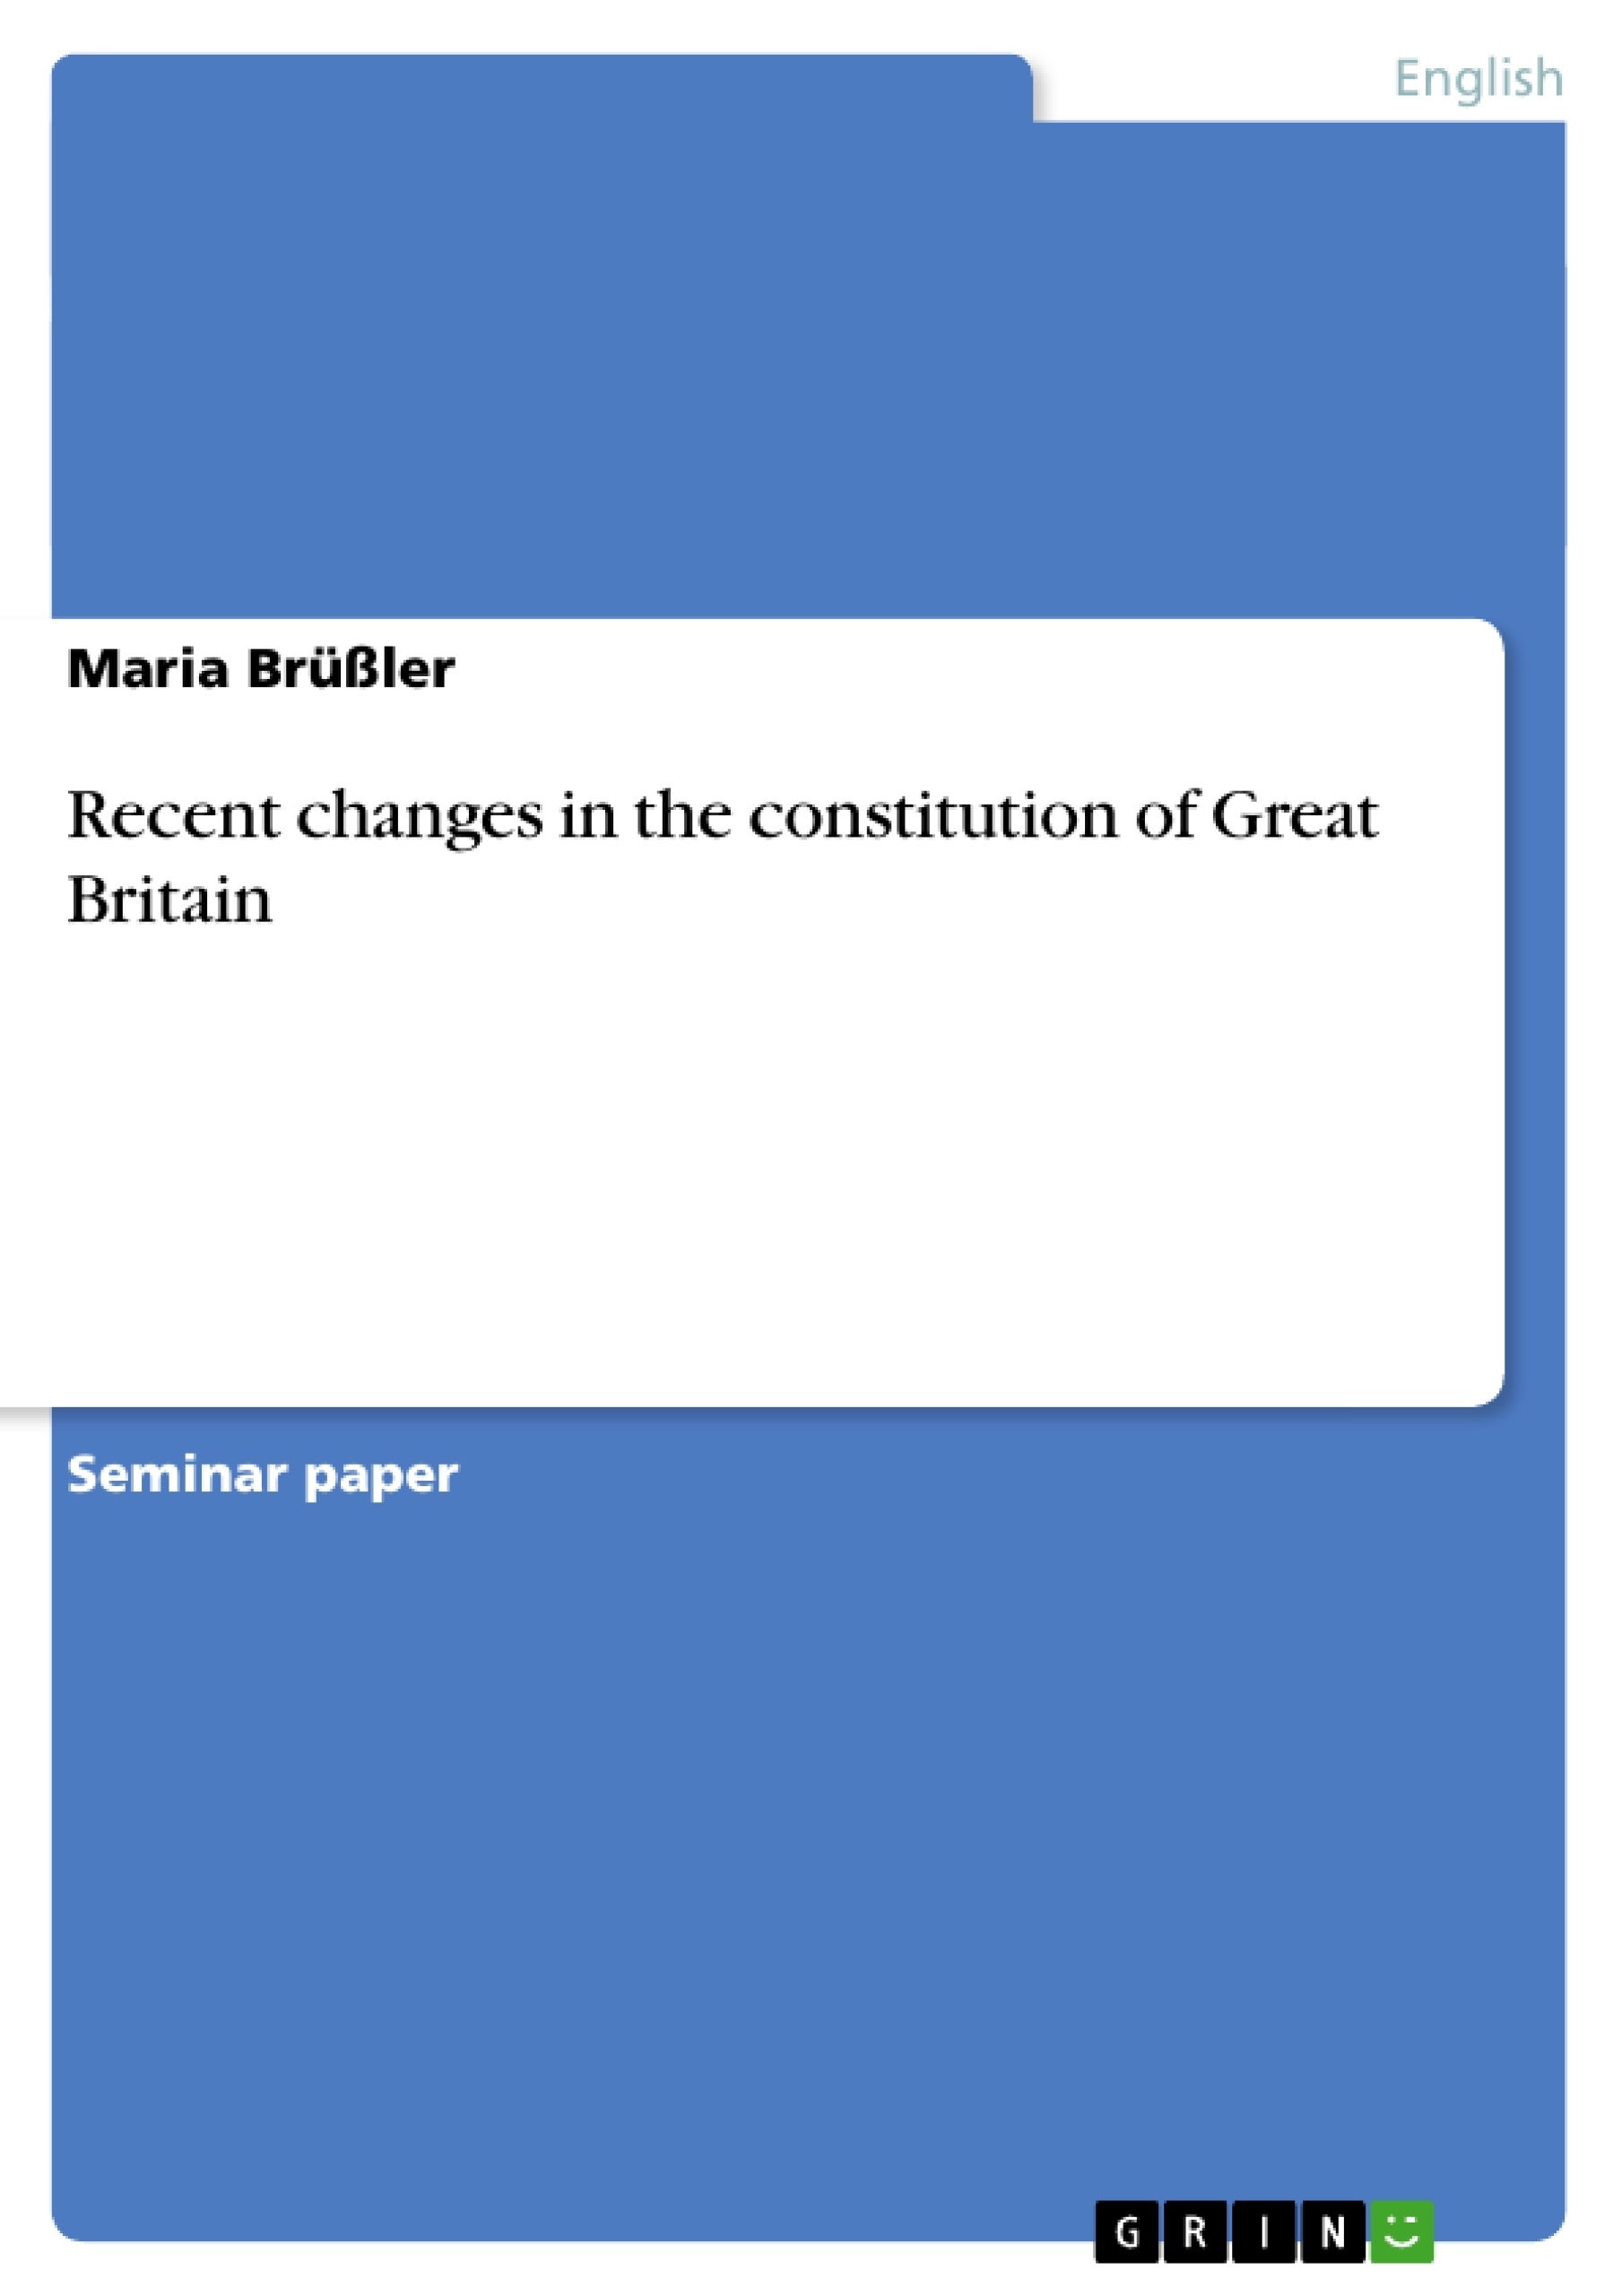 Title: Recent changes in the constitution of Great Britain